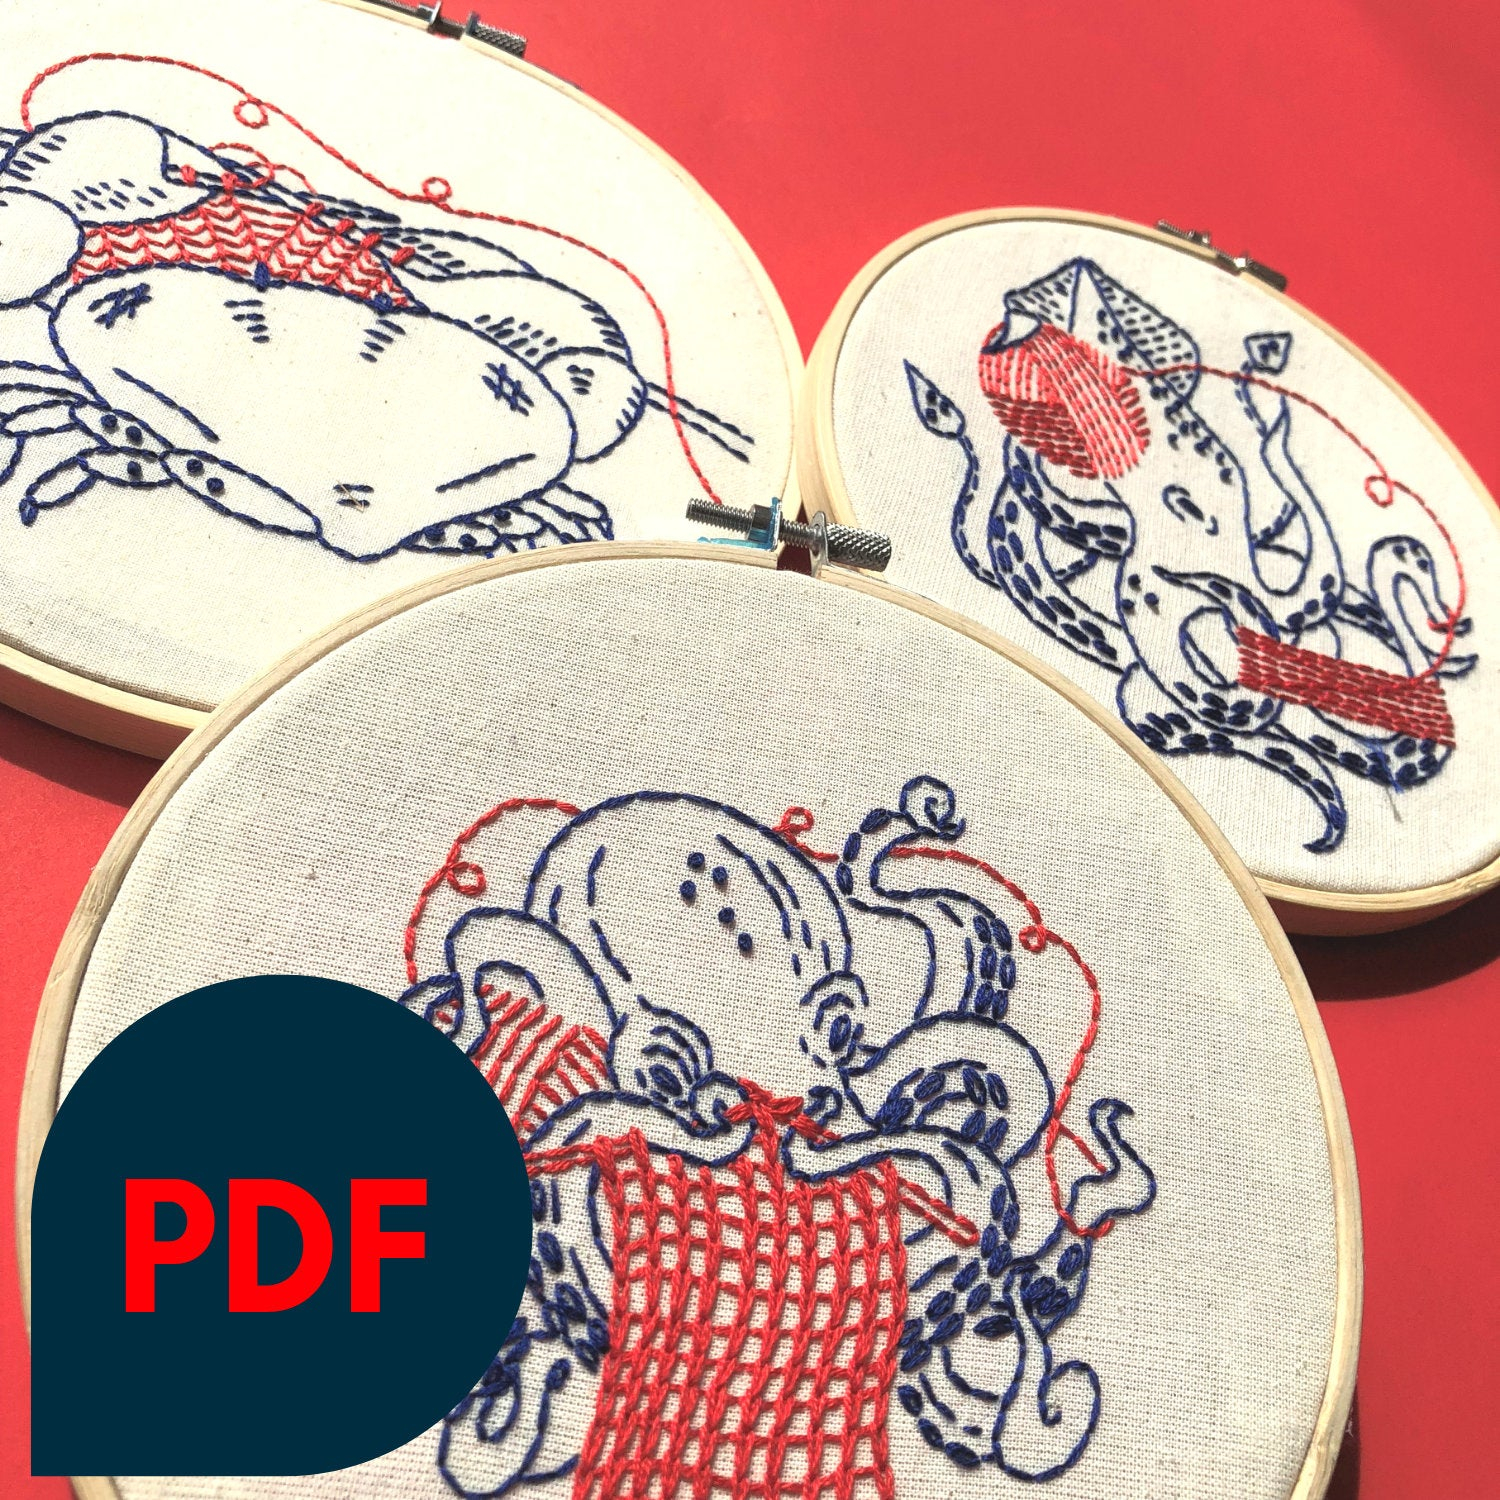 Nautical Embroidery Patterns Bundle Embroidery Pattern Downloadable Pdf Nautical Knitting Collection Squid Crab Octopus